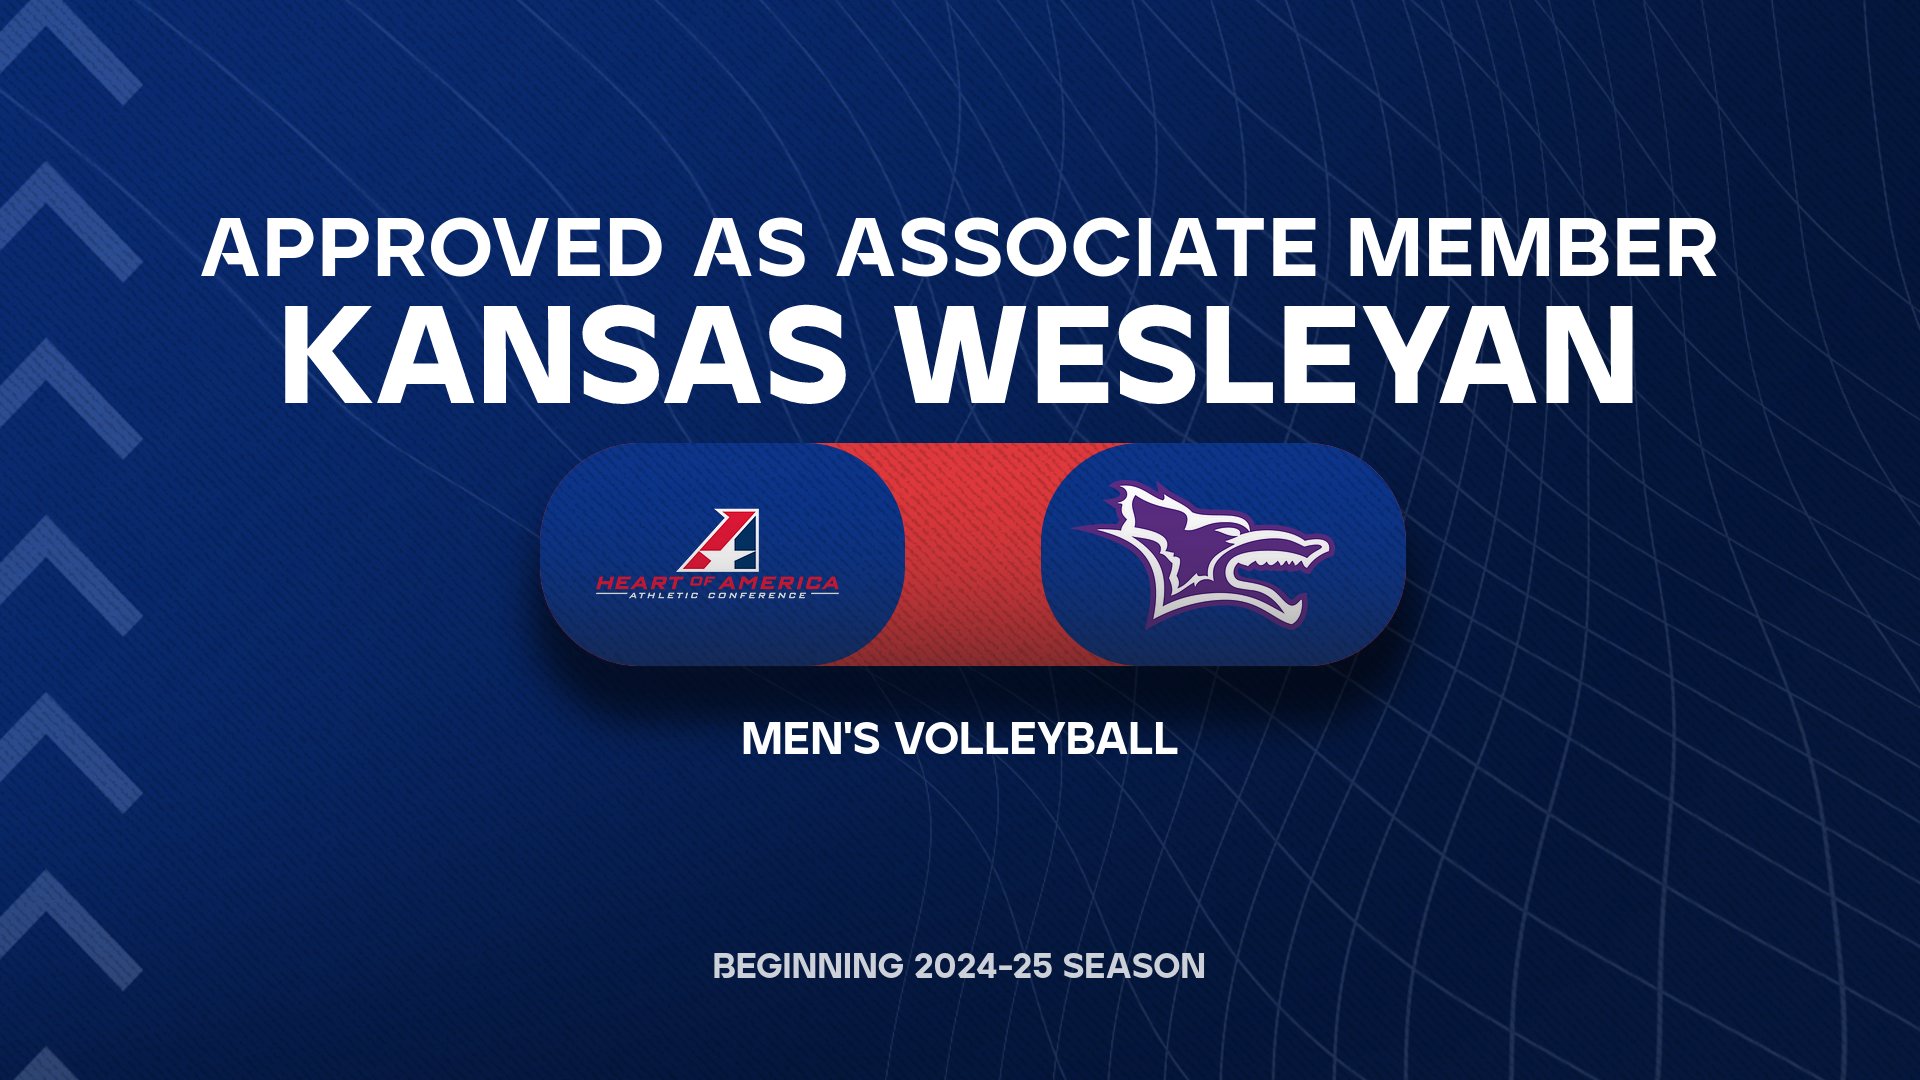 Heart of America Athletic Welcomes Kansas Wesleyan as Associate Member for Men's Volleyball for 2024-25 Season